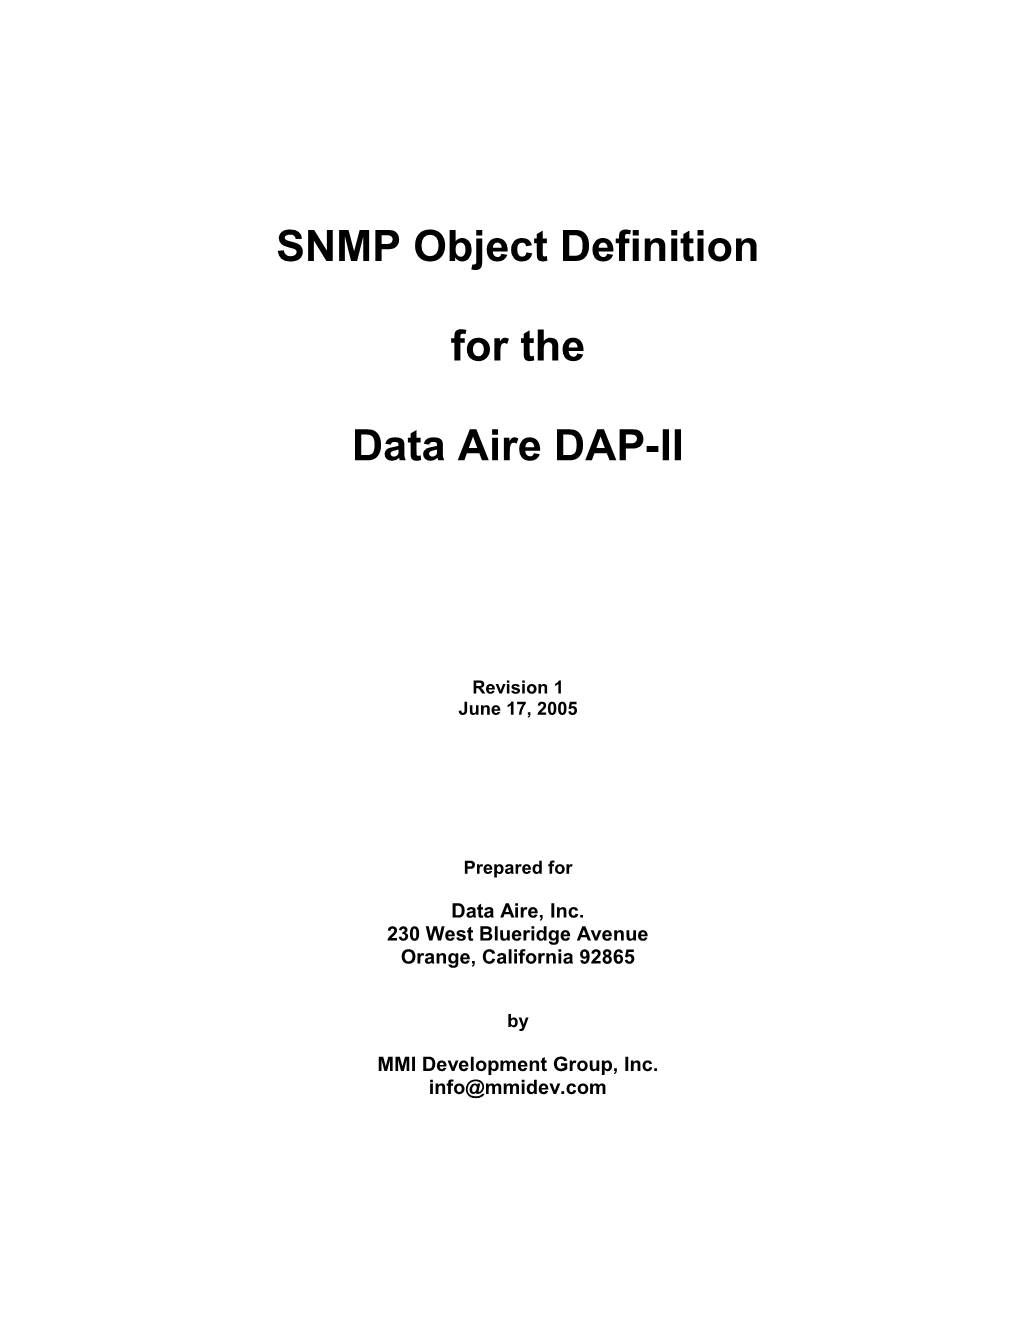 SNMP Object Definition